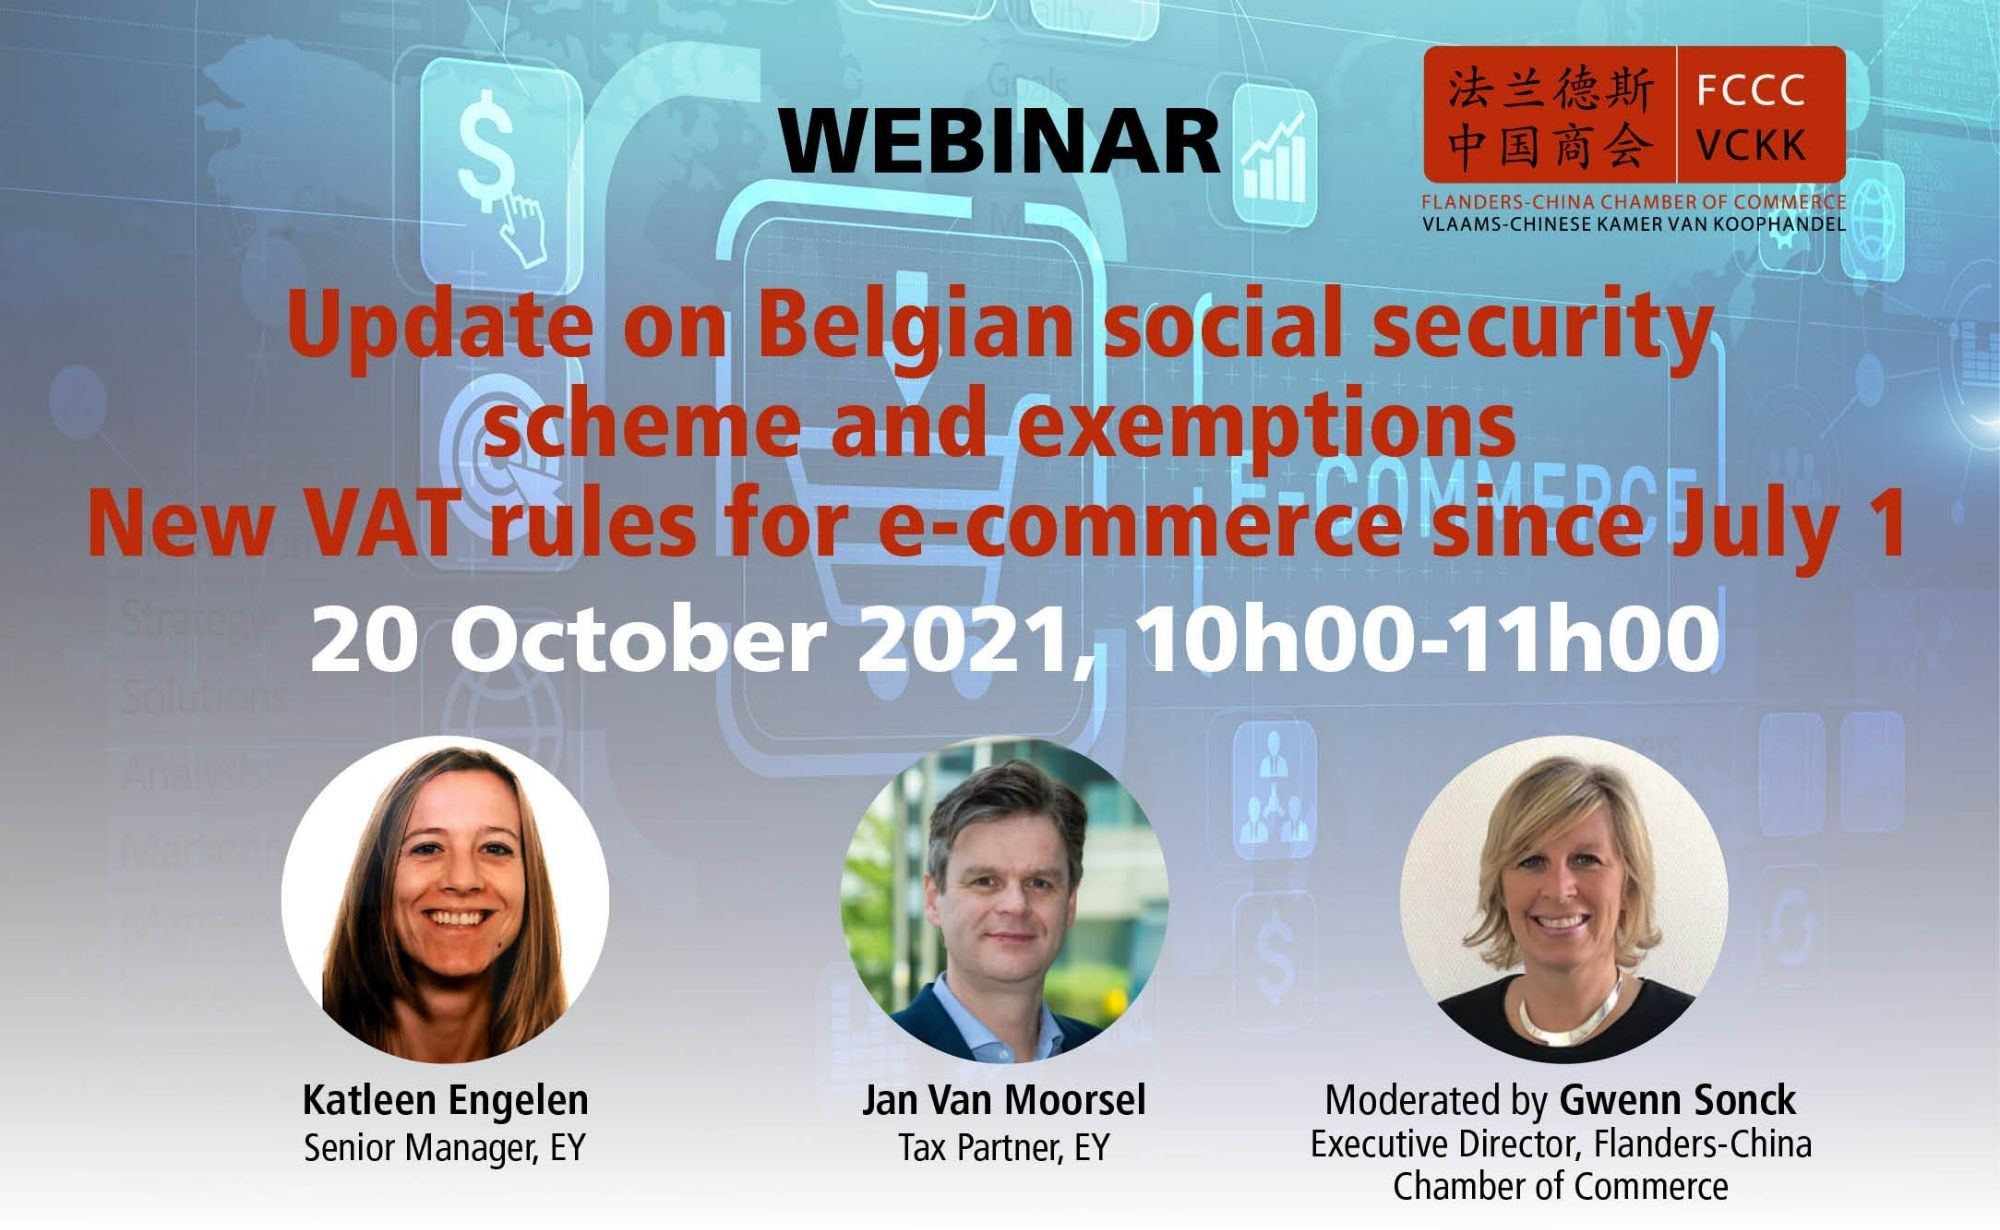 Webinar: Update on Belgian social security scheme and exemptions - New VAT rules for e-commerce since July 1